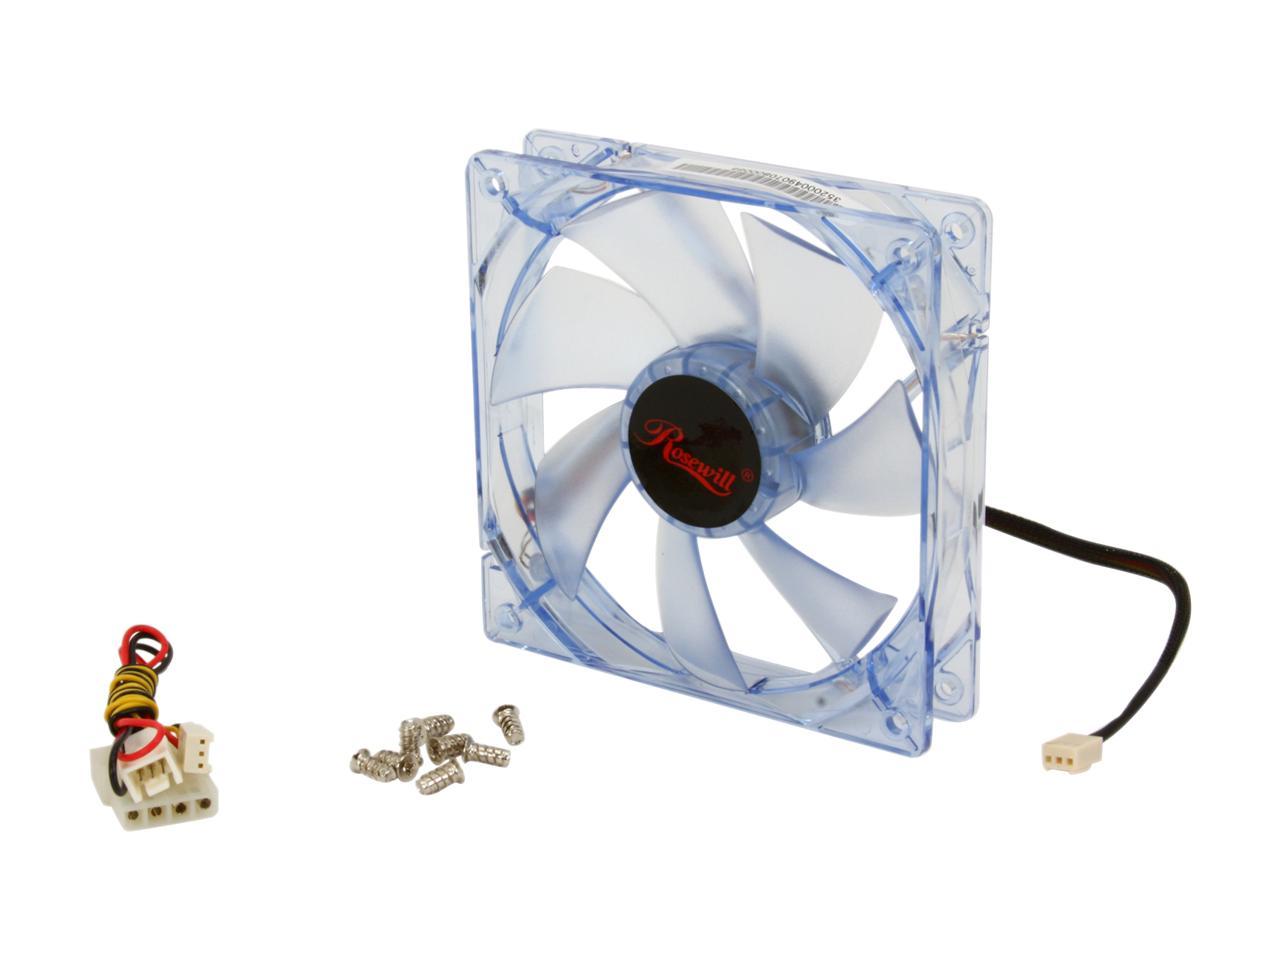 Rosewill RFA-120-BL - 120mm Computer Case Cooling Fan with LP4 Adapter - Blue Frame & 4 Blue LED Lights, Sleeve Bearing, Silent Case Fan